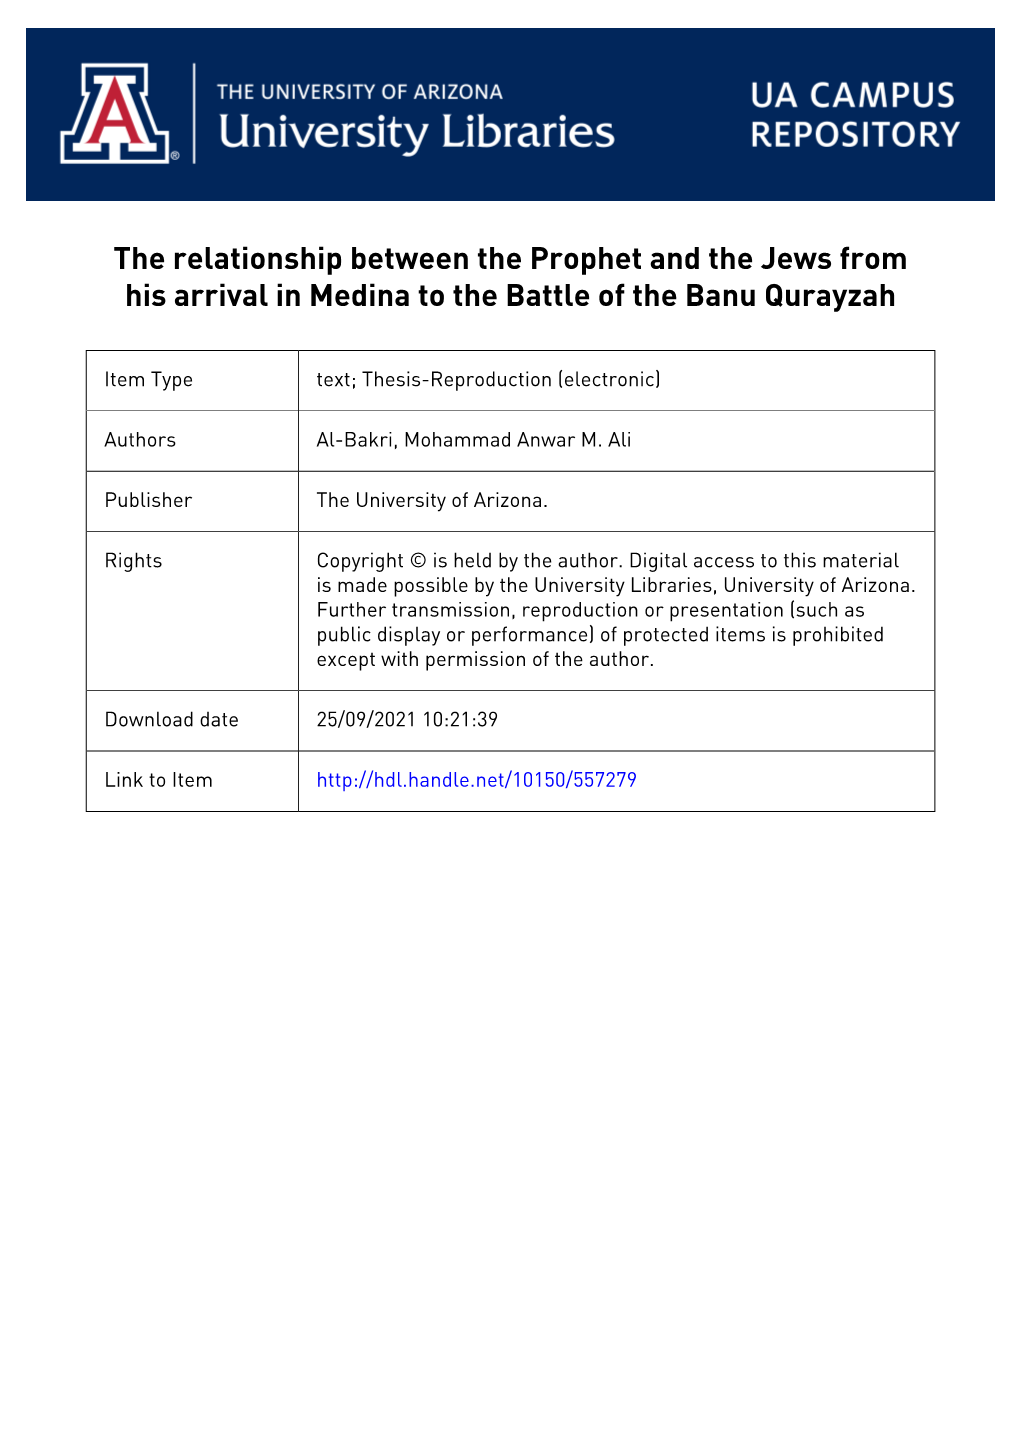 The Relationship Between the Prophet and the Jews from His Arrival in Medina to the Battle of the Banu Qurayzah